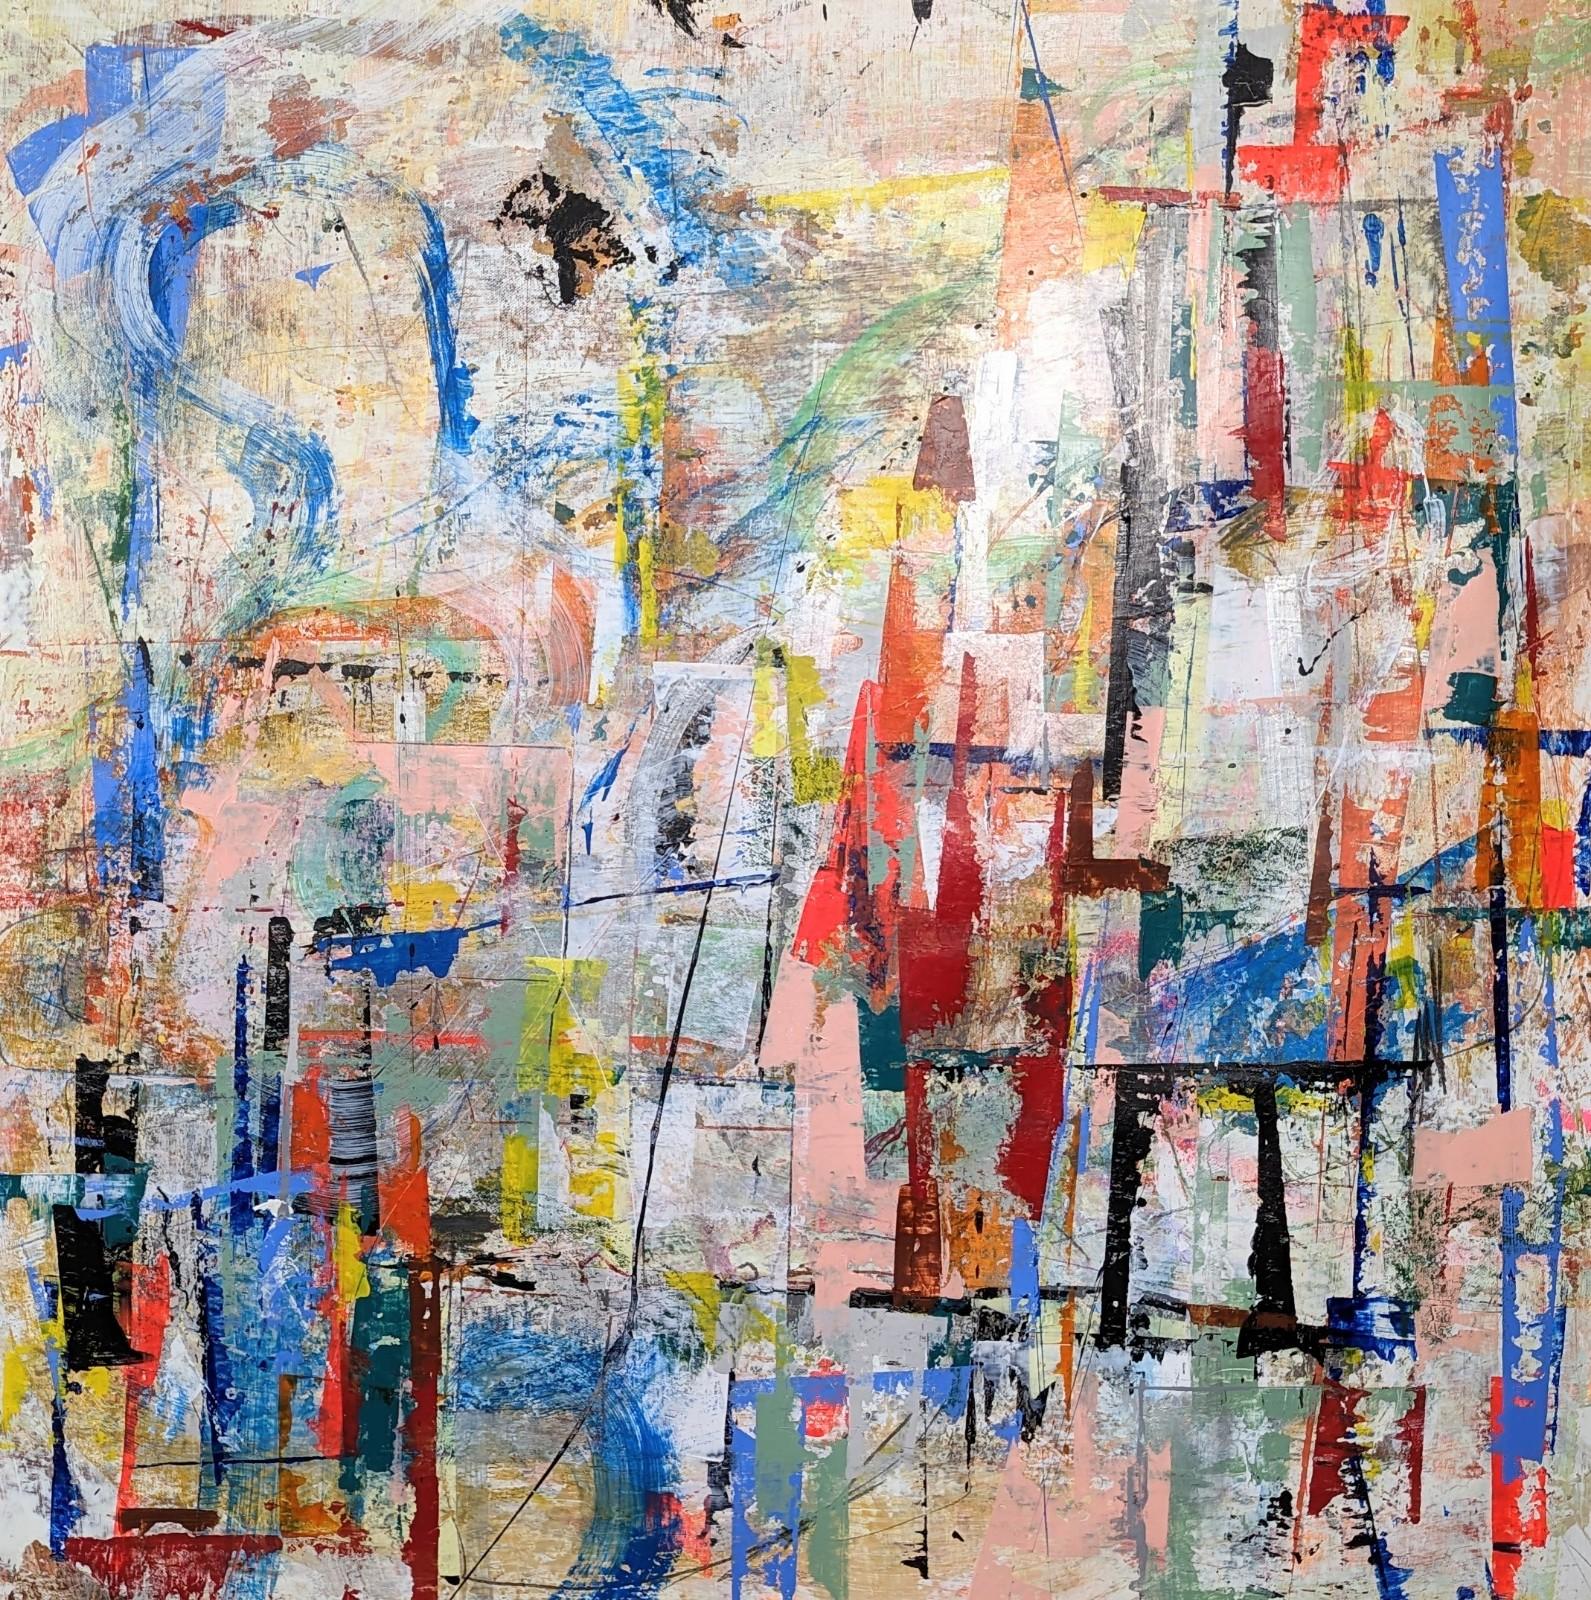 Chi Town III by Joseph Conrad-Ferm, 2023
Mixed medium painting on canvas
W 32" x H 32"

Mixed medium painting on canvas by NY-based artist Joseph Conrad-Ferm.

Shipping is not included. See our shipping policies. Please contact us for shipping